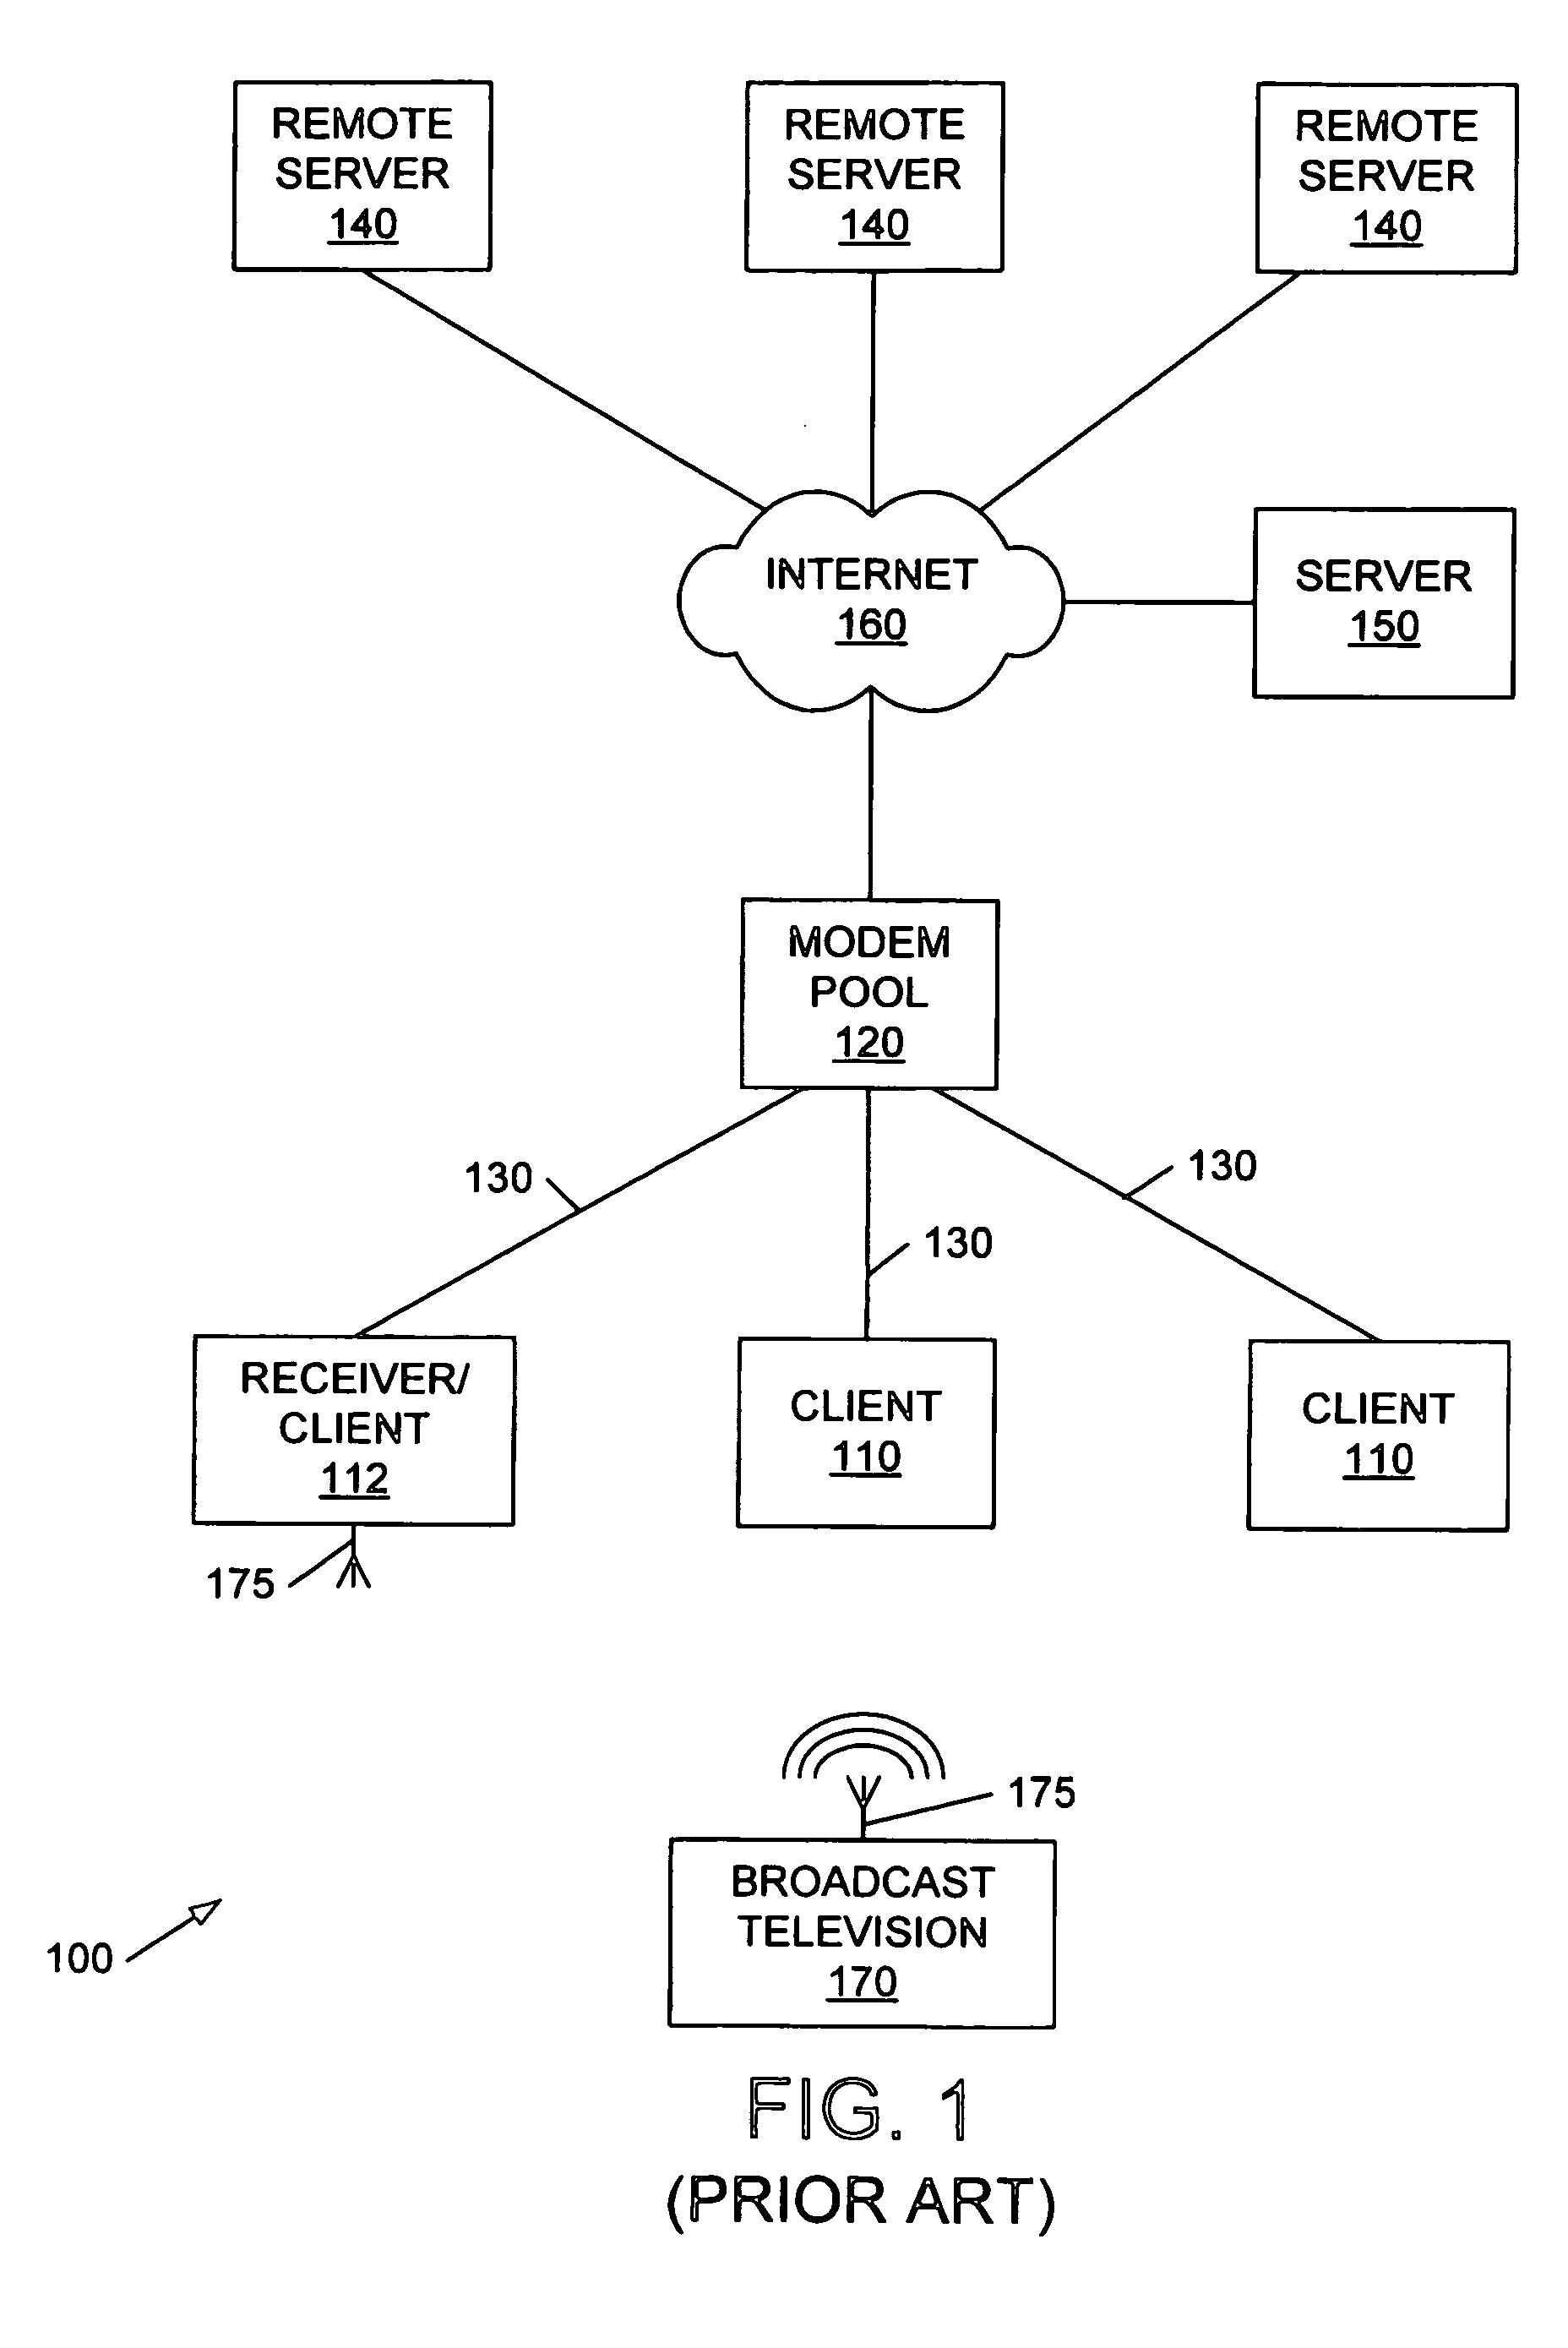 Communicating scripts in a data service channel of a video signal